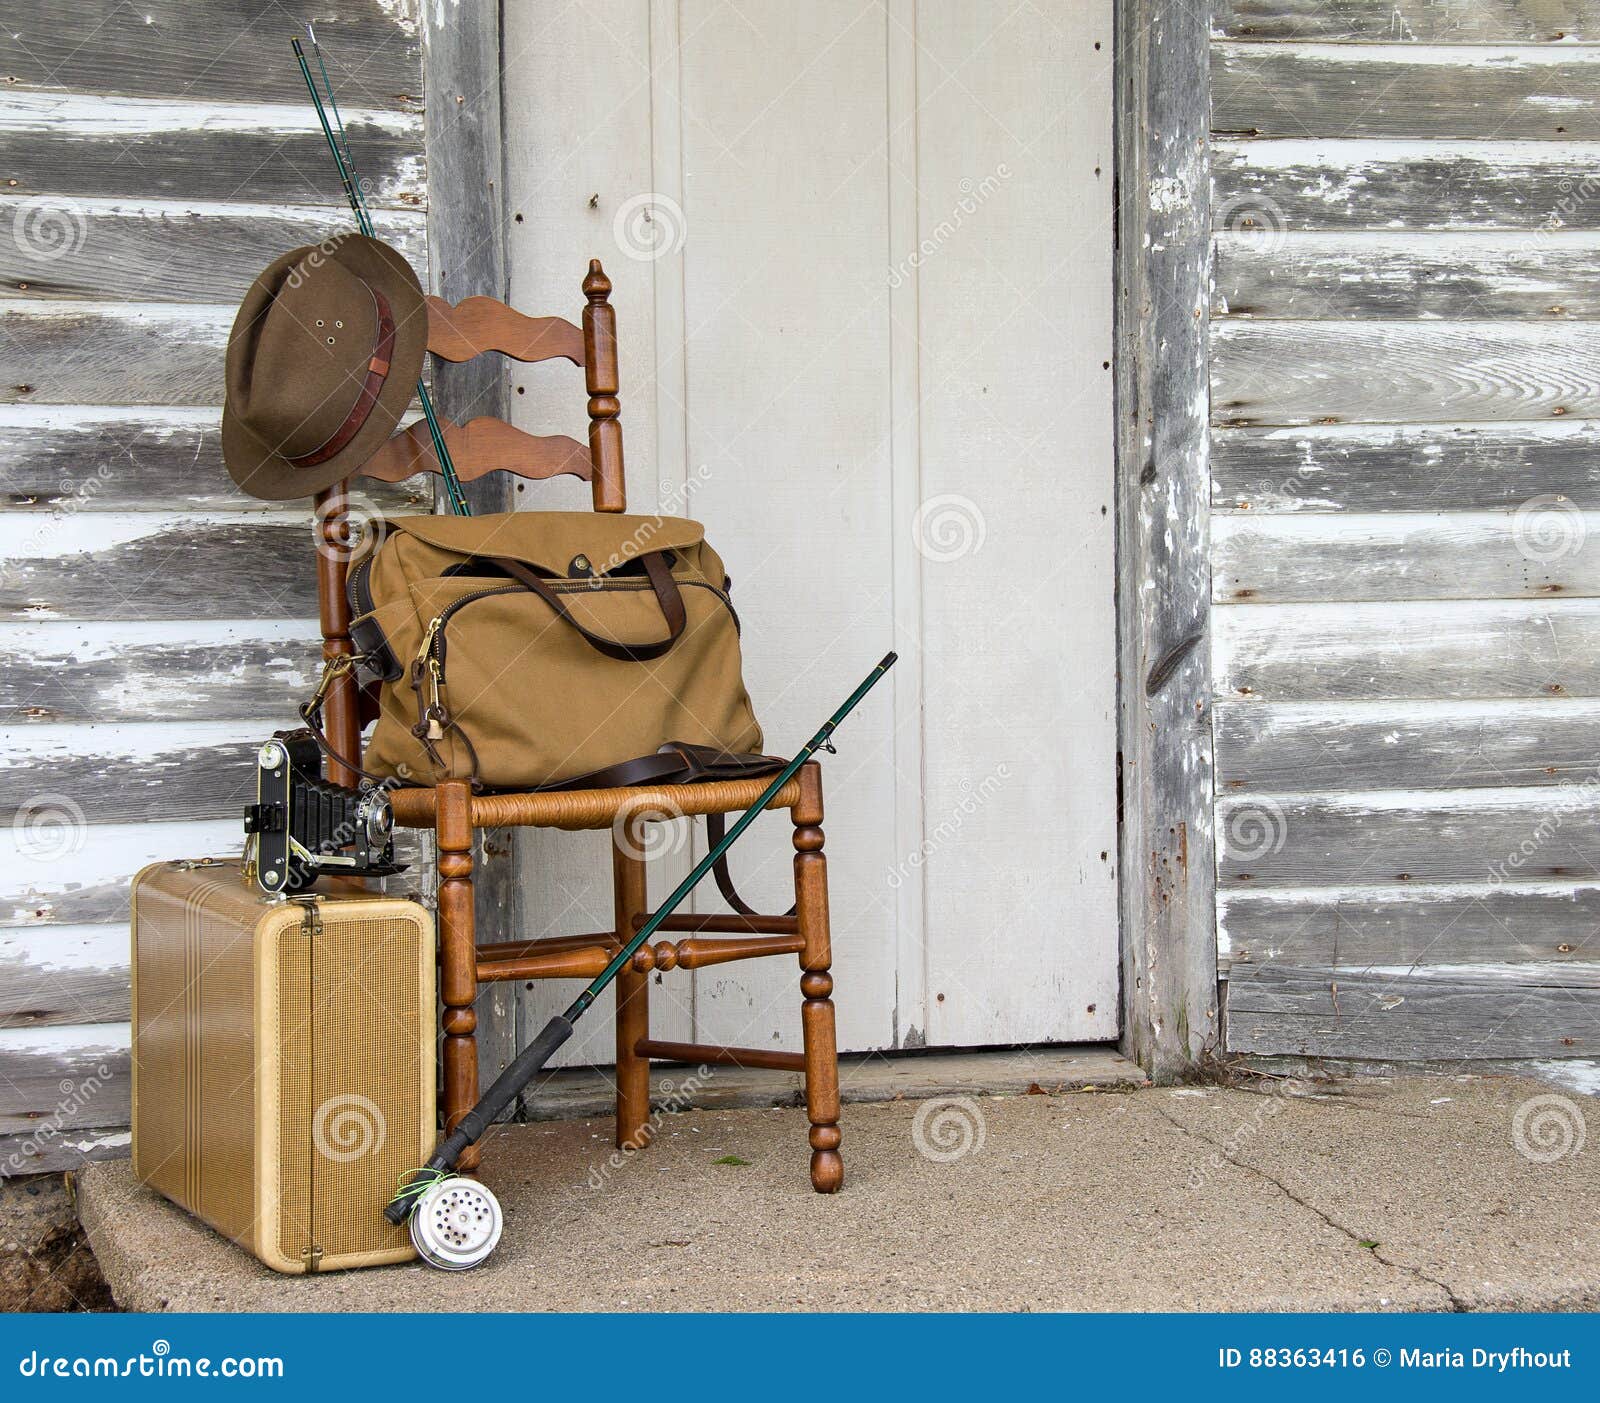 Vintage Fishing Pole with Suitcase on Chair Stock Photo - Image of